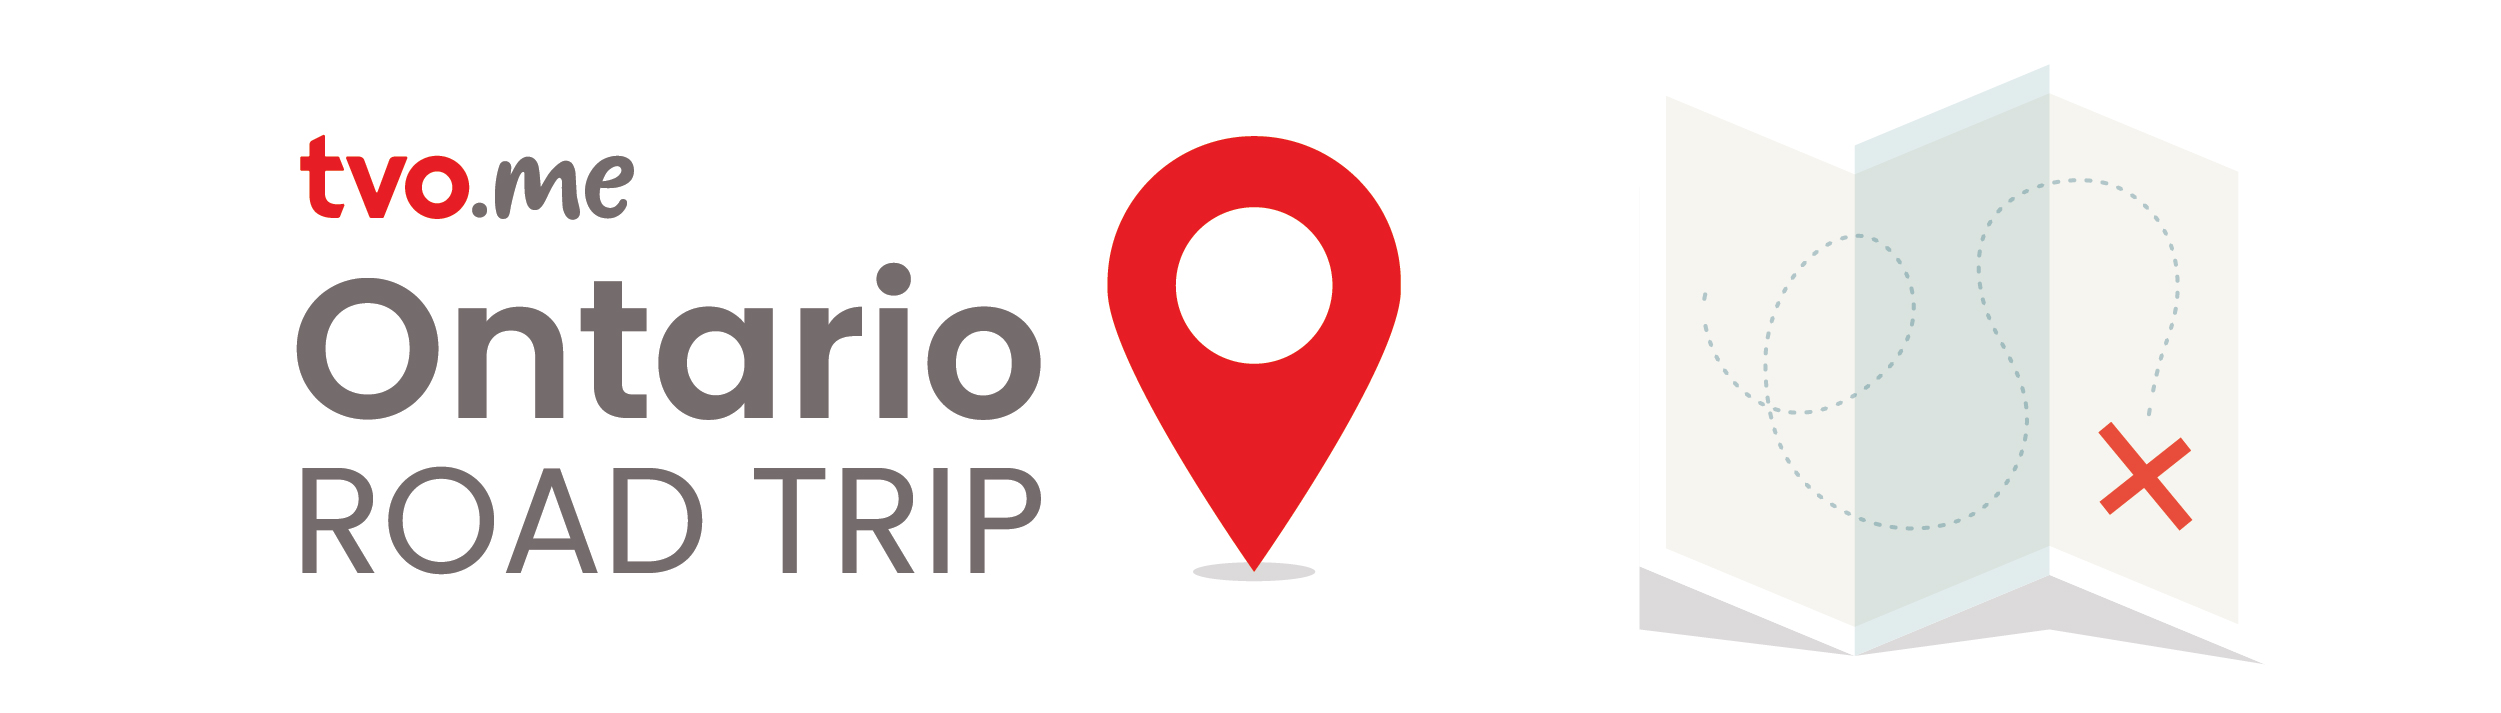 A full width image with the words TVO.me Ontario Road Trip next to a pin marker for a map and a half-folded map featuring a dotted line and a big red X.